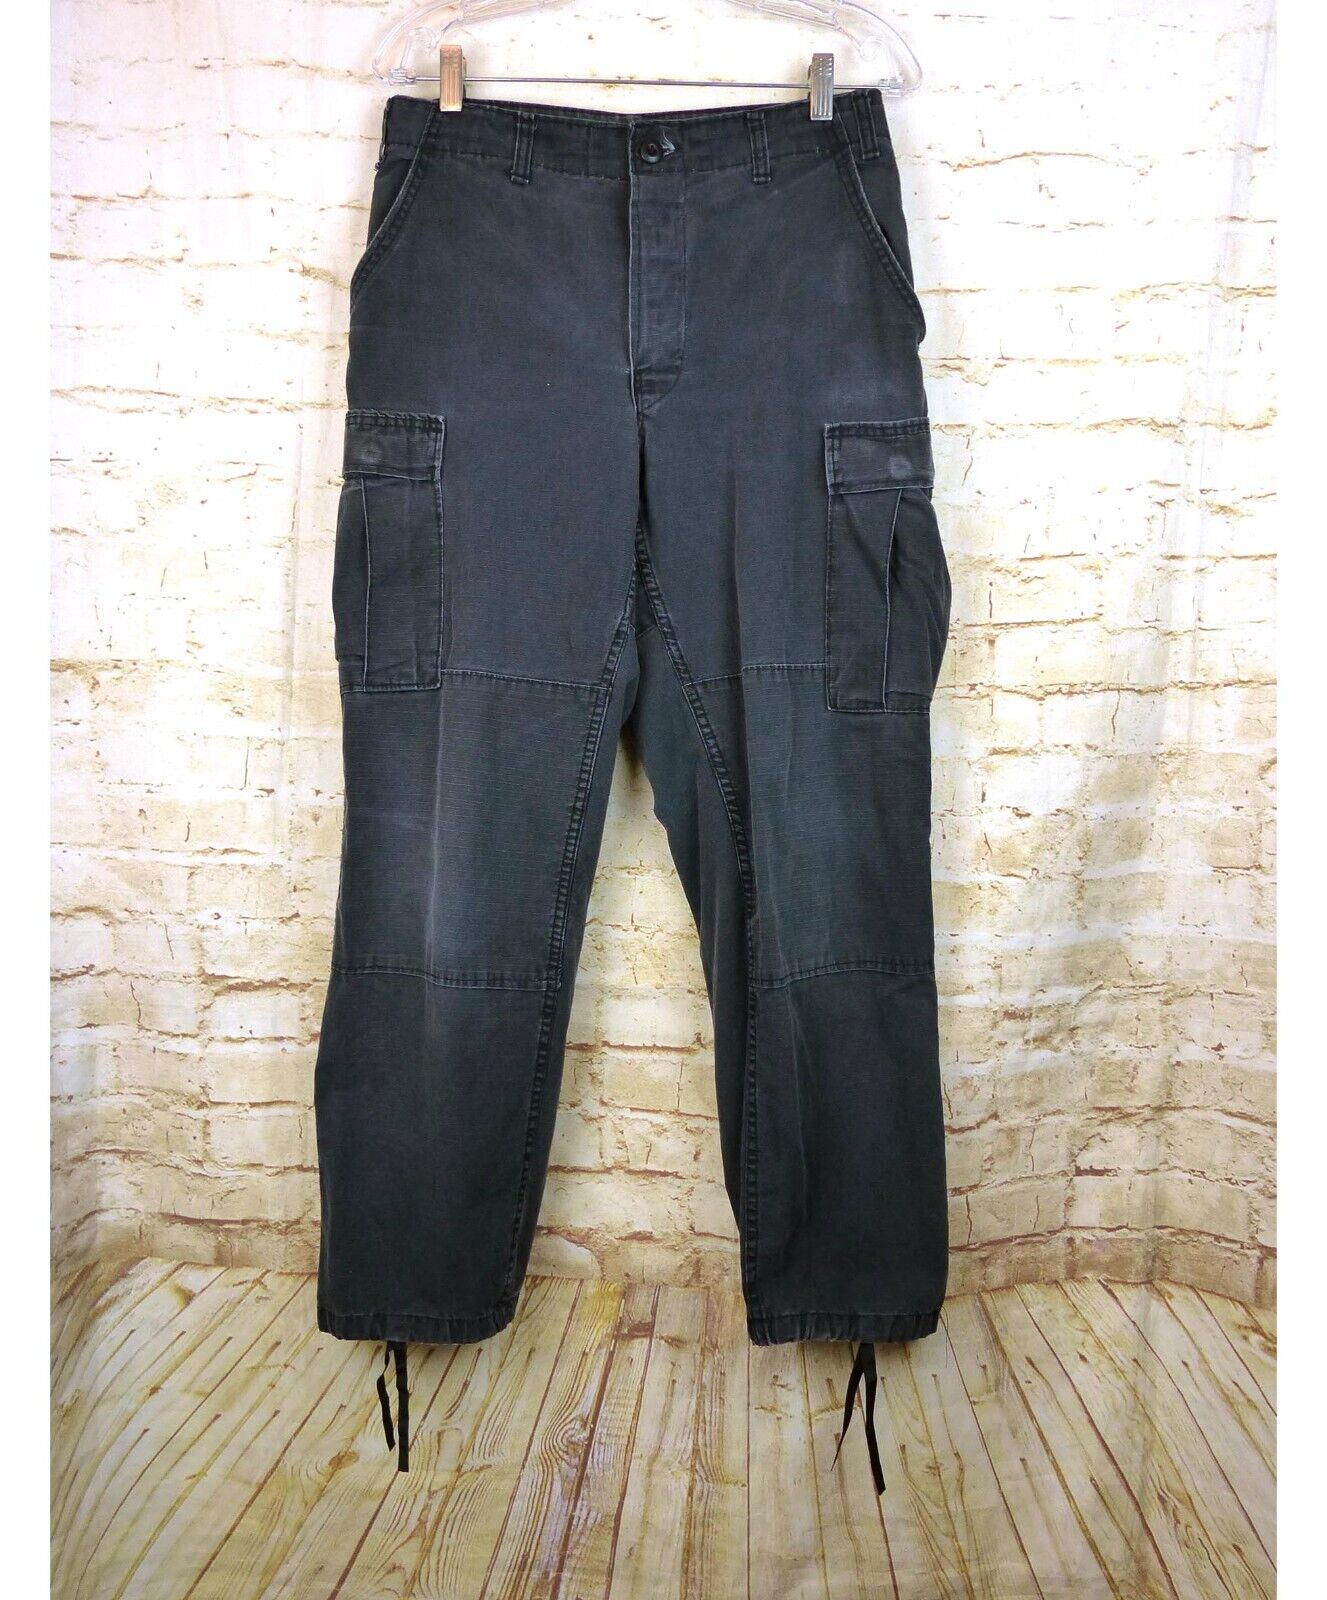 VTG Rothco Military Cargo Pants Mens S Black Ripstop Button Fly Utility USA FLAW